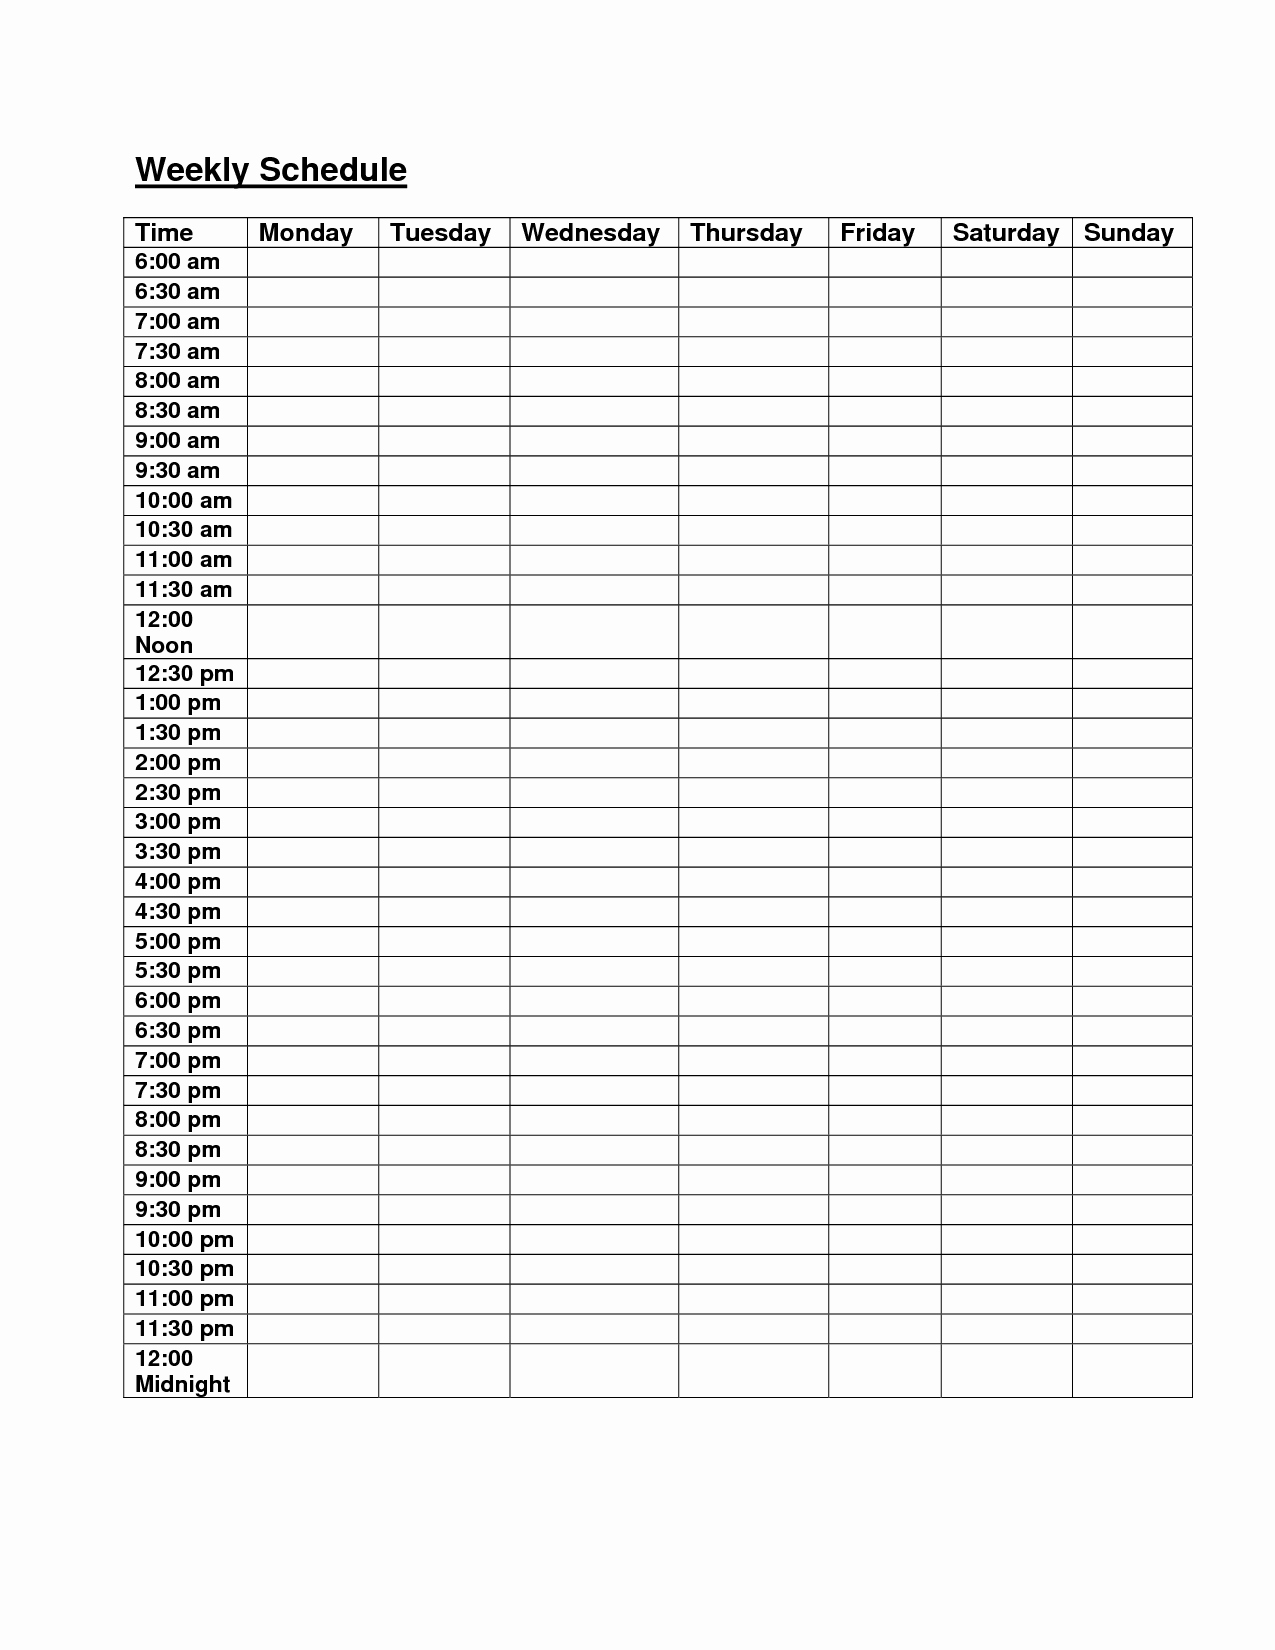 Working Hours Schedule Template Inspirational Printable Daily Schedule